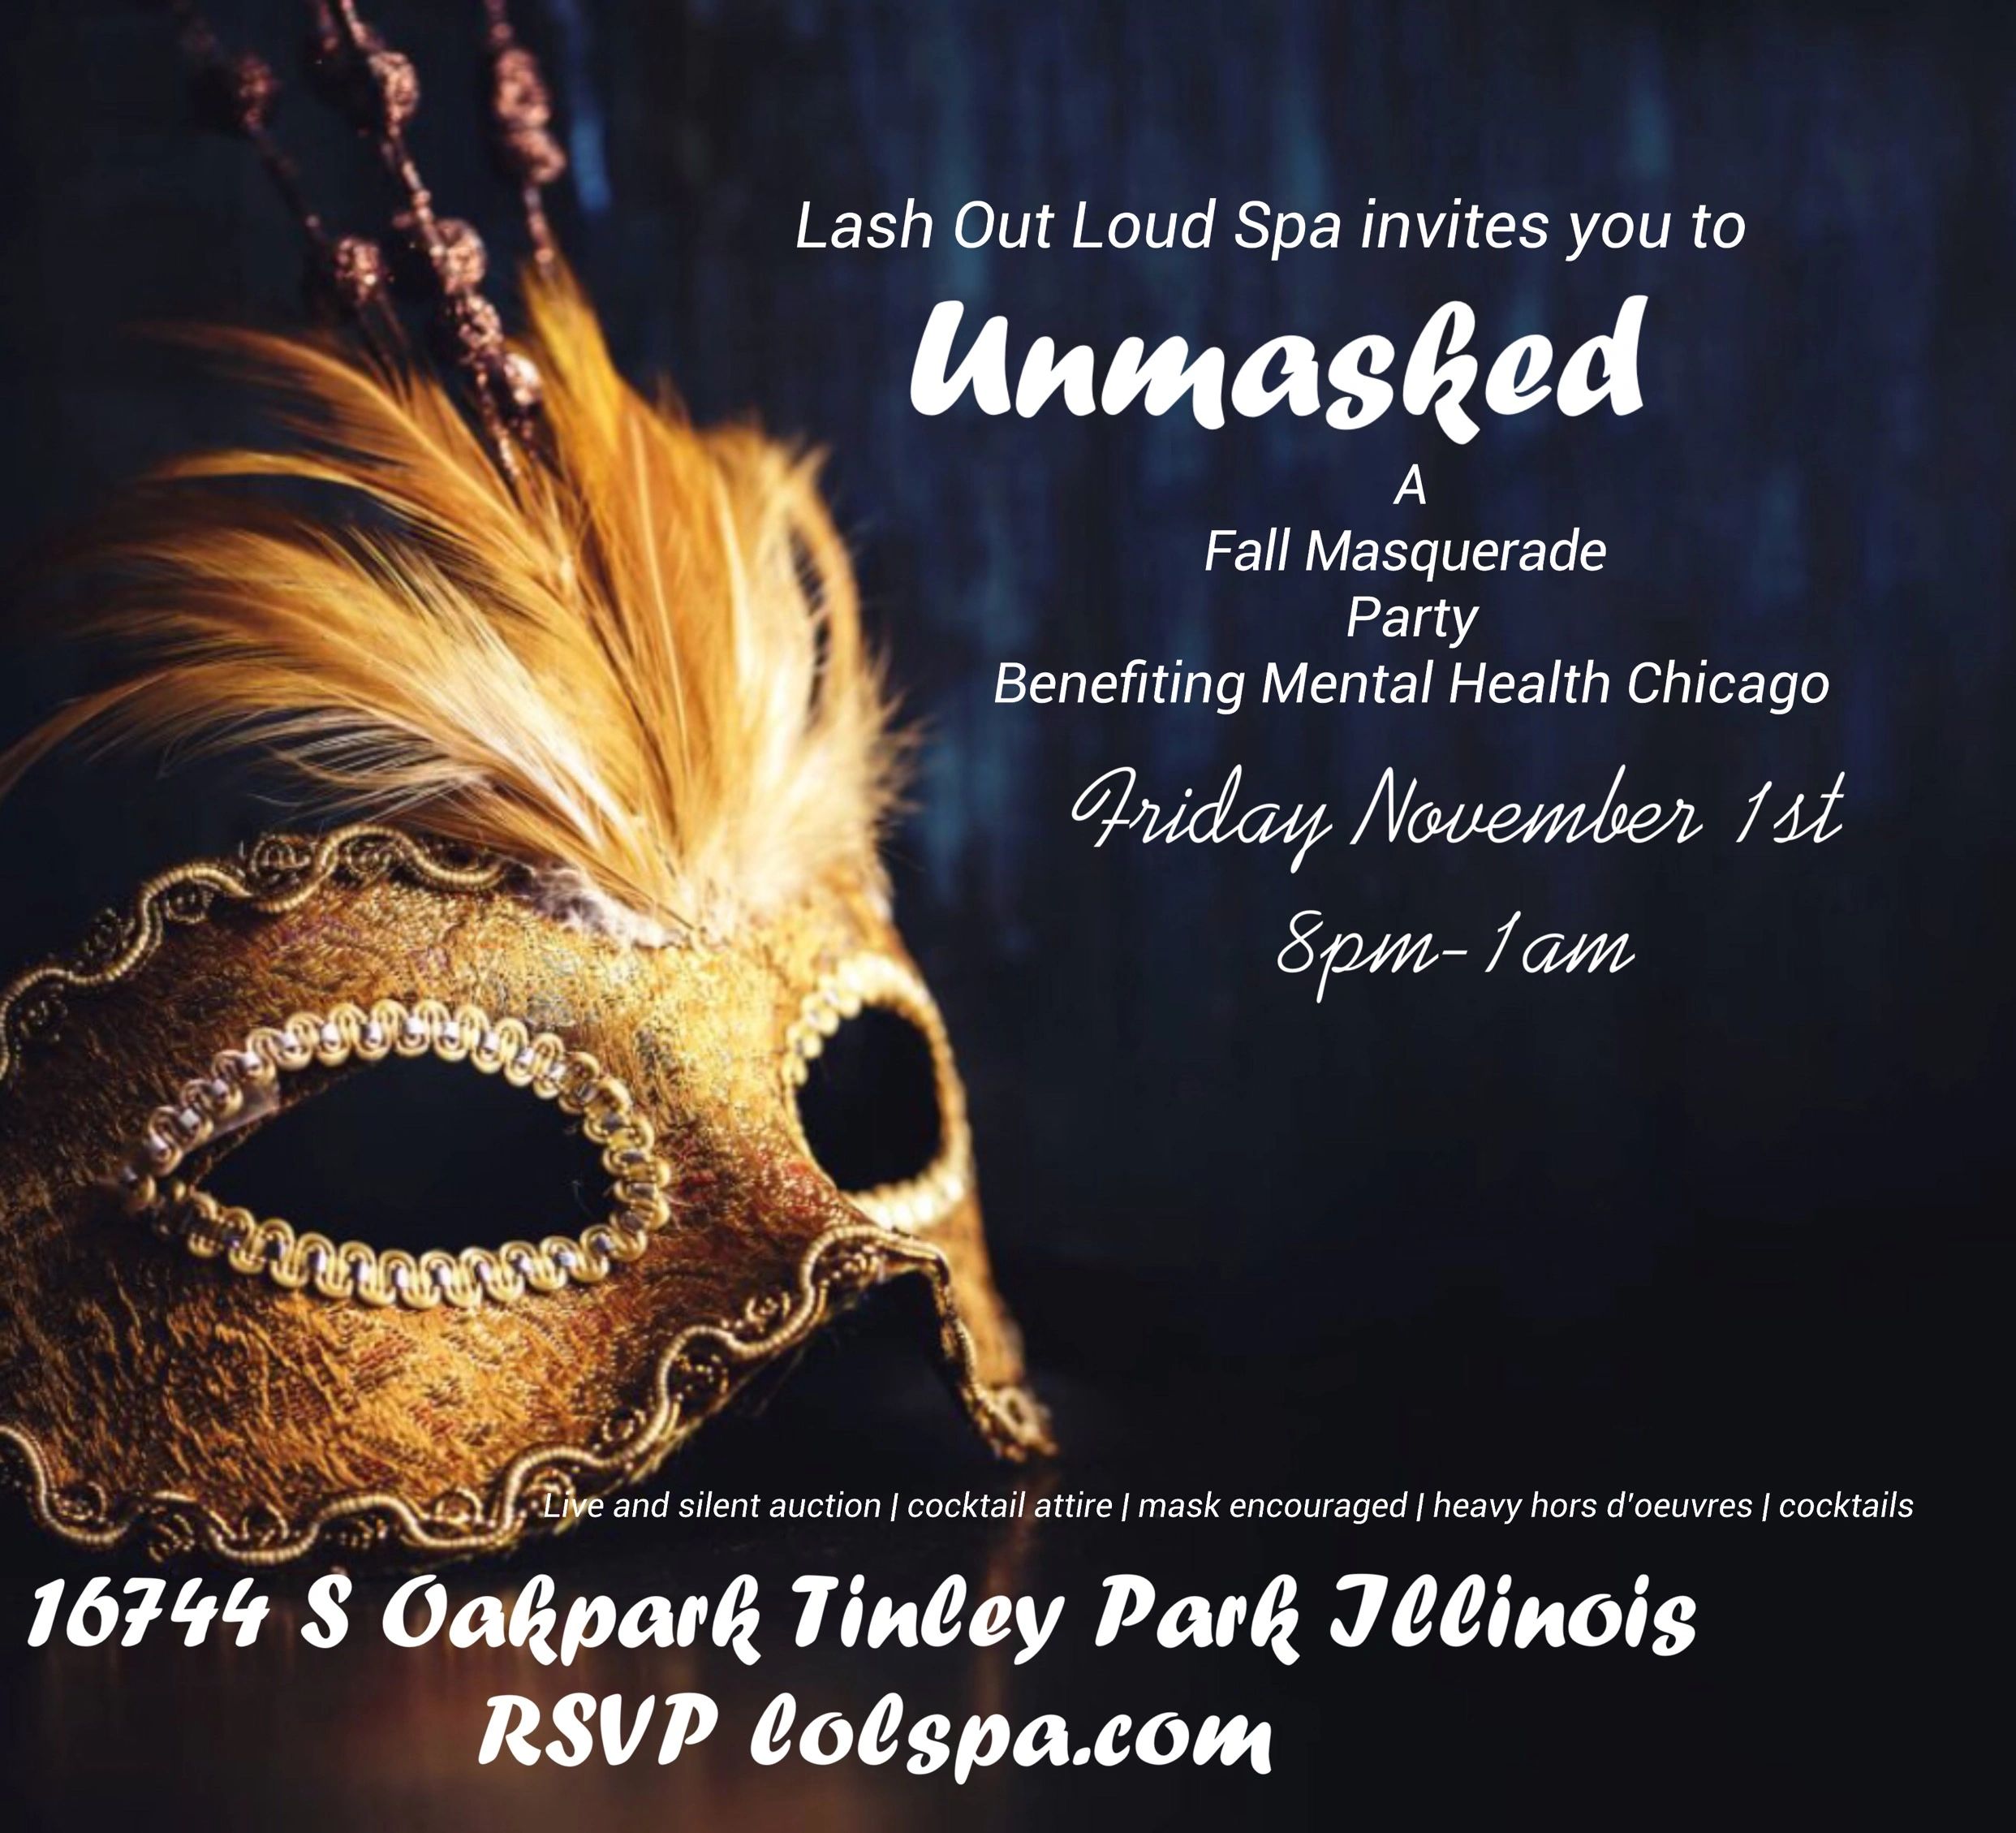 “Unmasked” 
A masquerade party! 
Hosted by LASH OUT LOUD SPA  | DJ 808z | DJ SHAUN T
https://www.eve